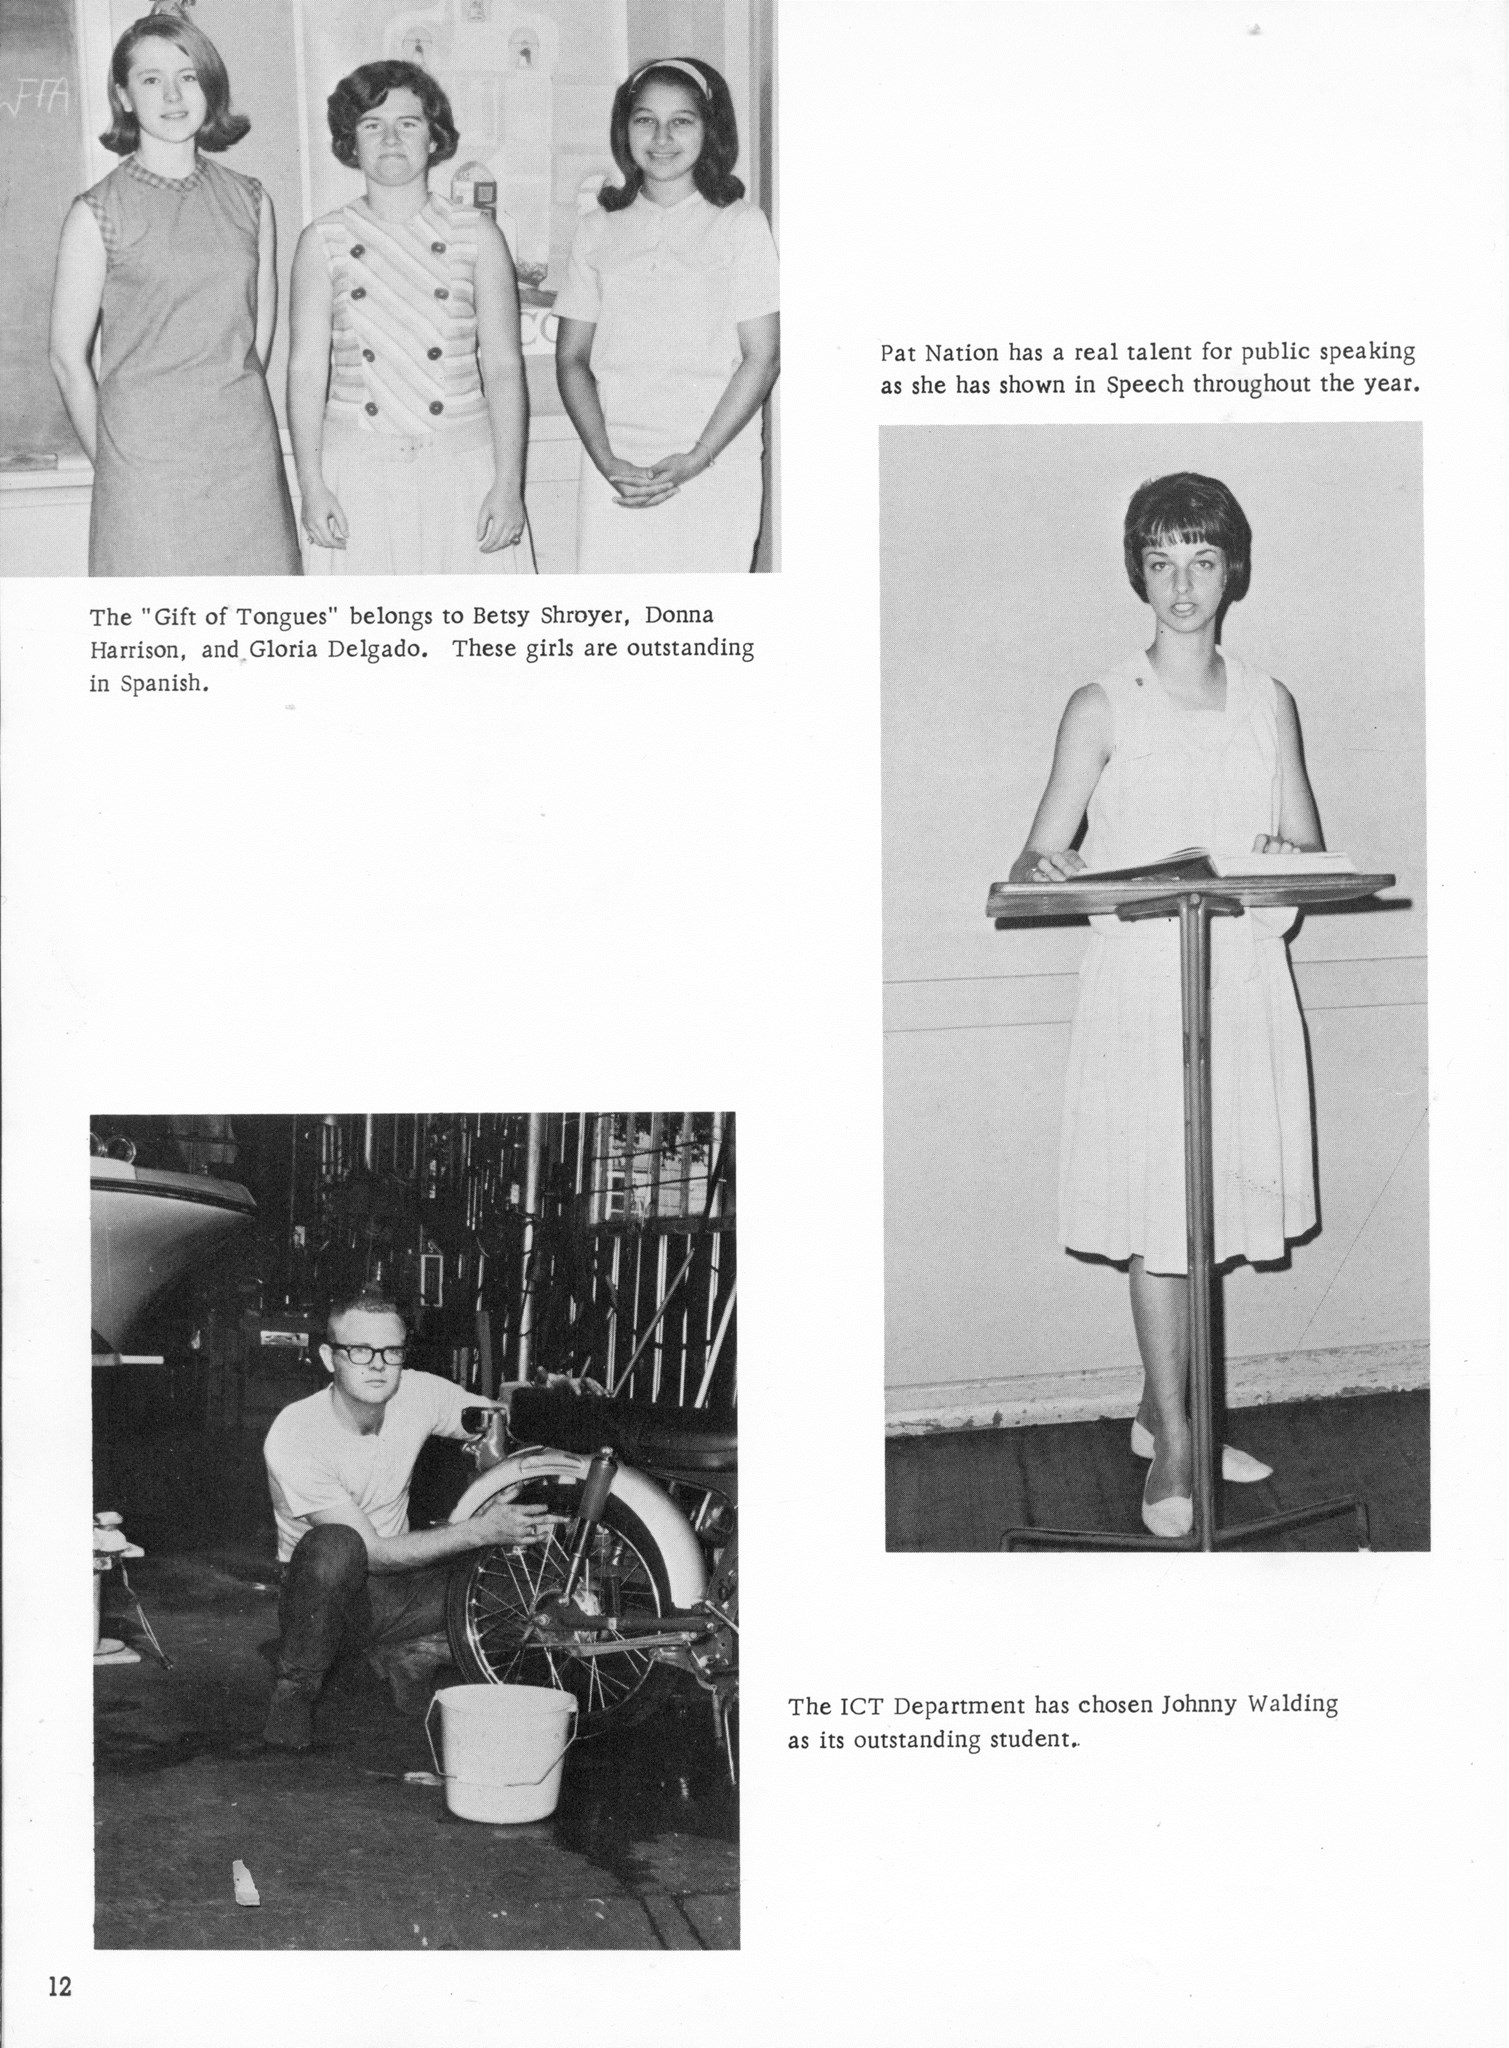 ../../../Images/Large/1966/Arclight-1966-pg0012.jpg